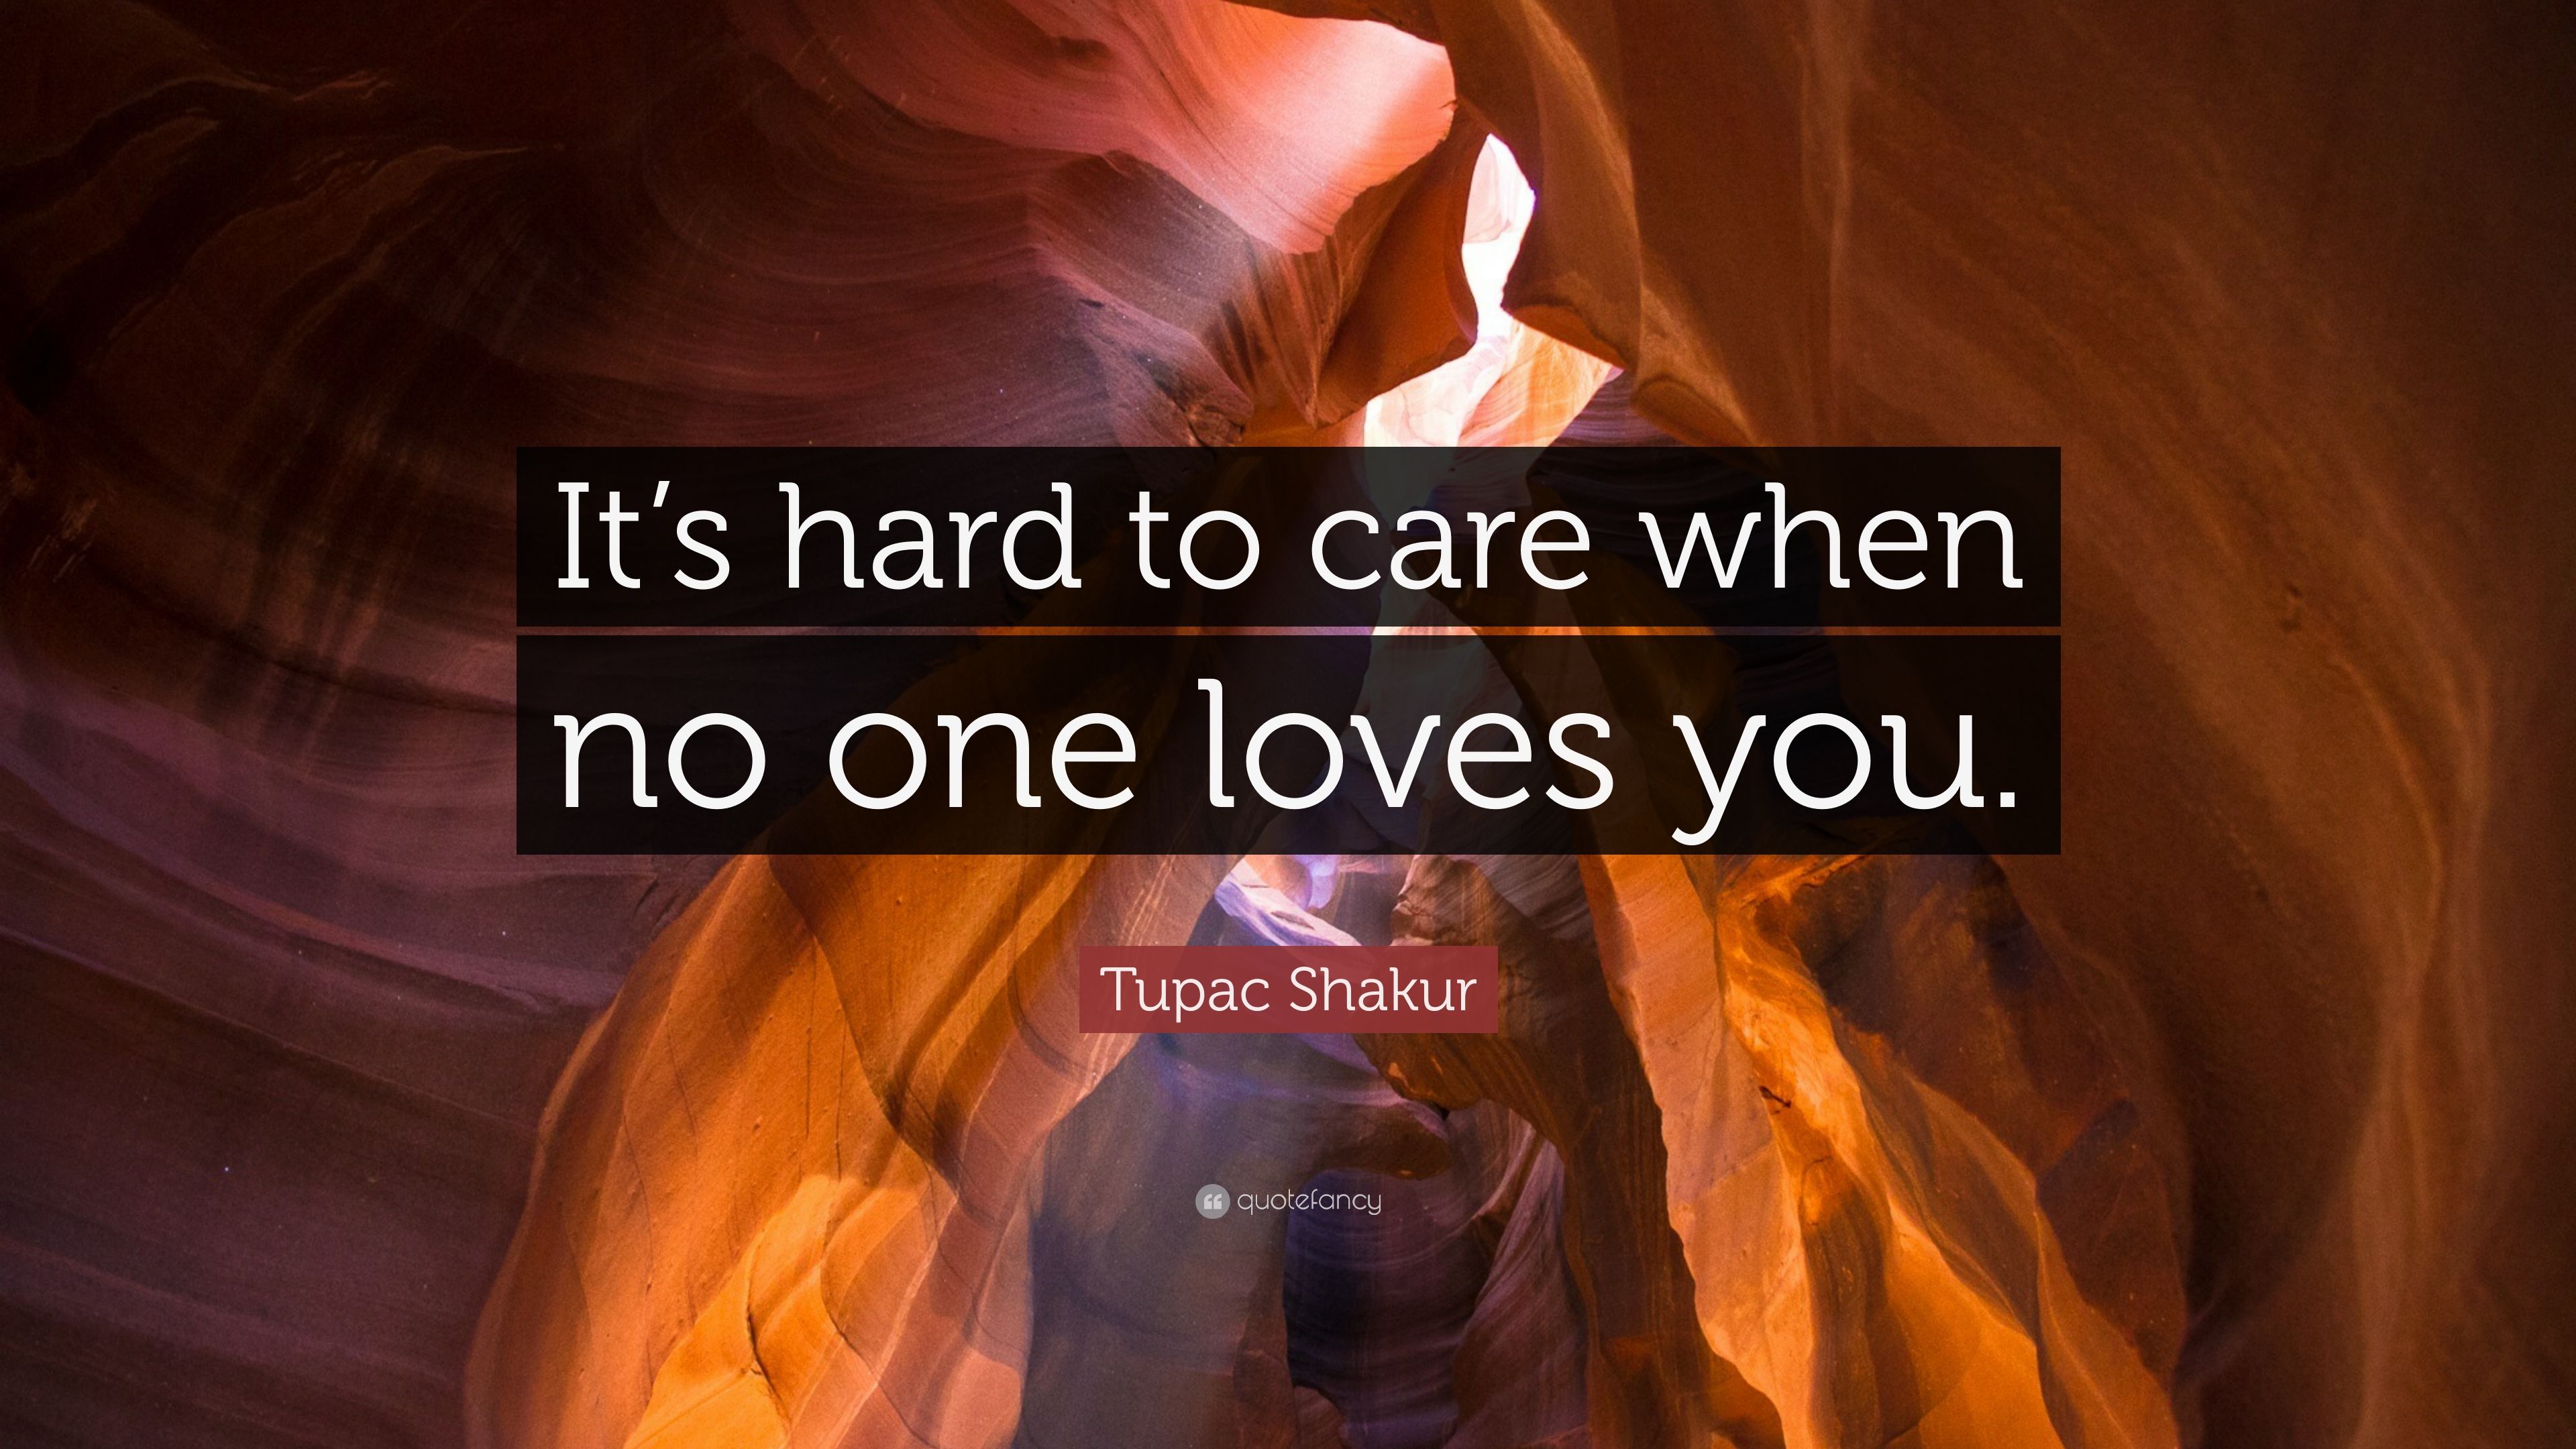 Tupac Shakur Quote: “It's hard to care when no one loves you.” (7 wallpaper)